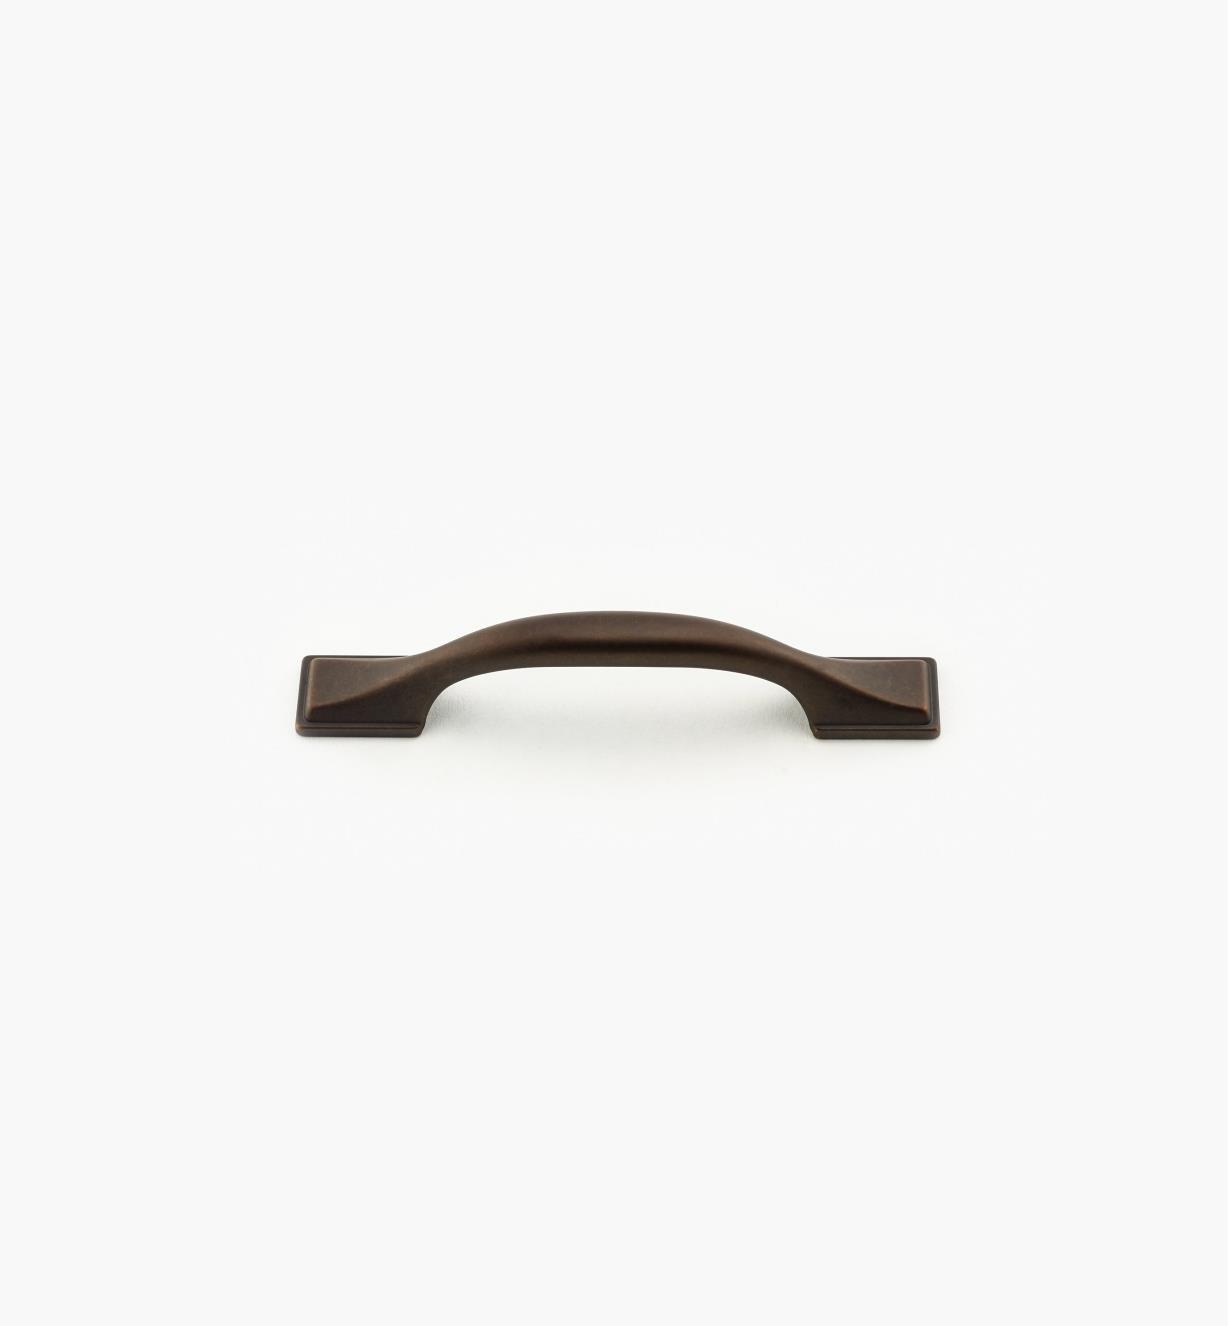 00A7285 - 96mm Handle (5 5/8")